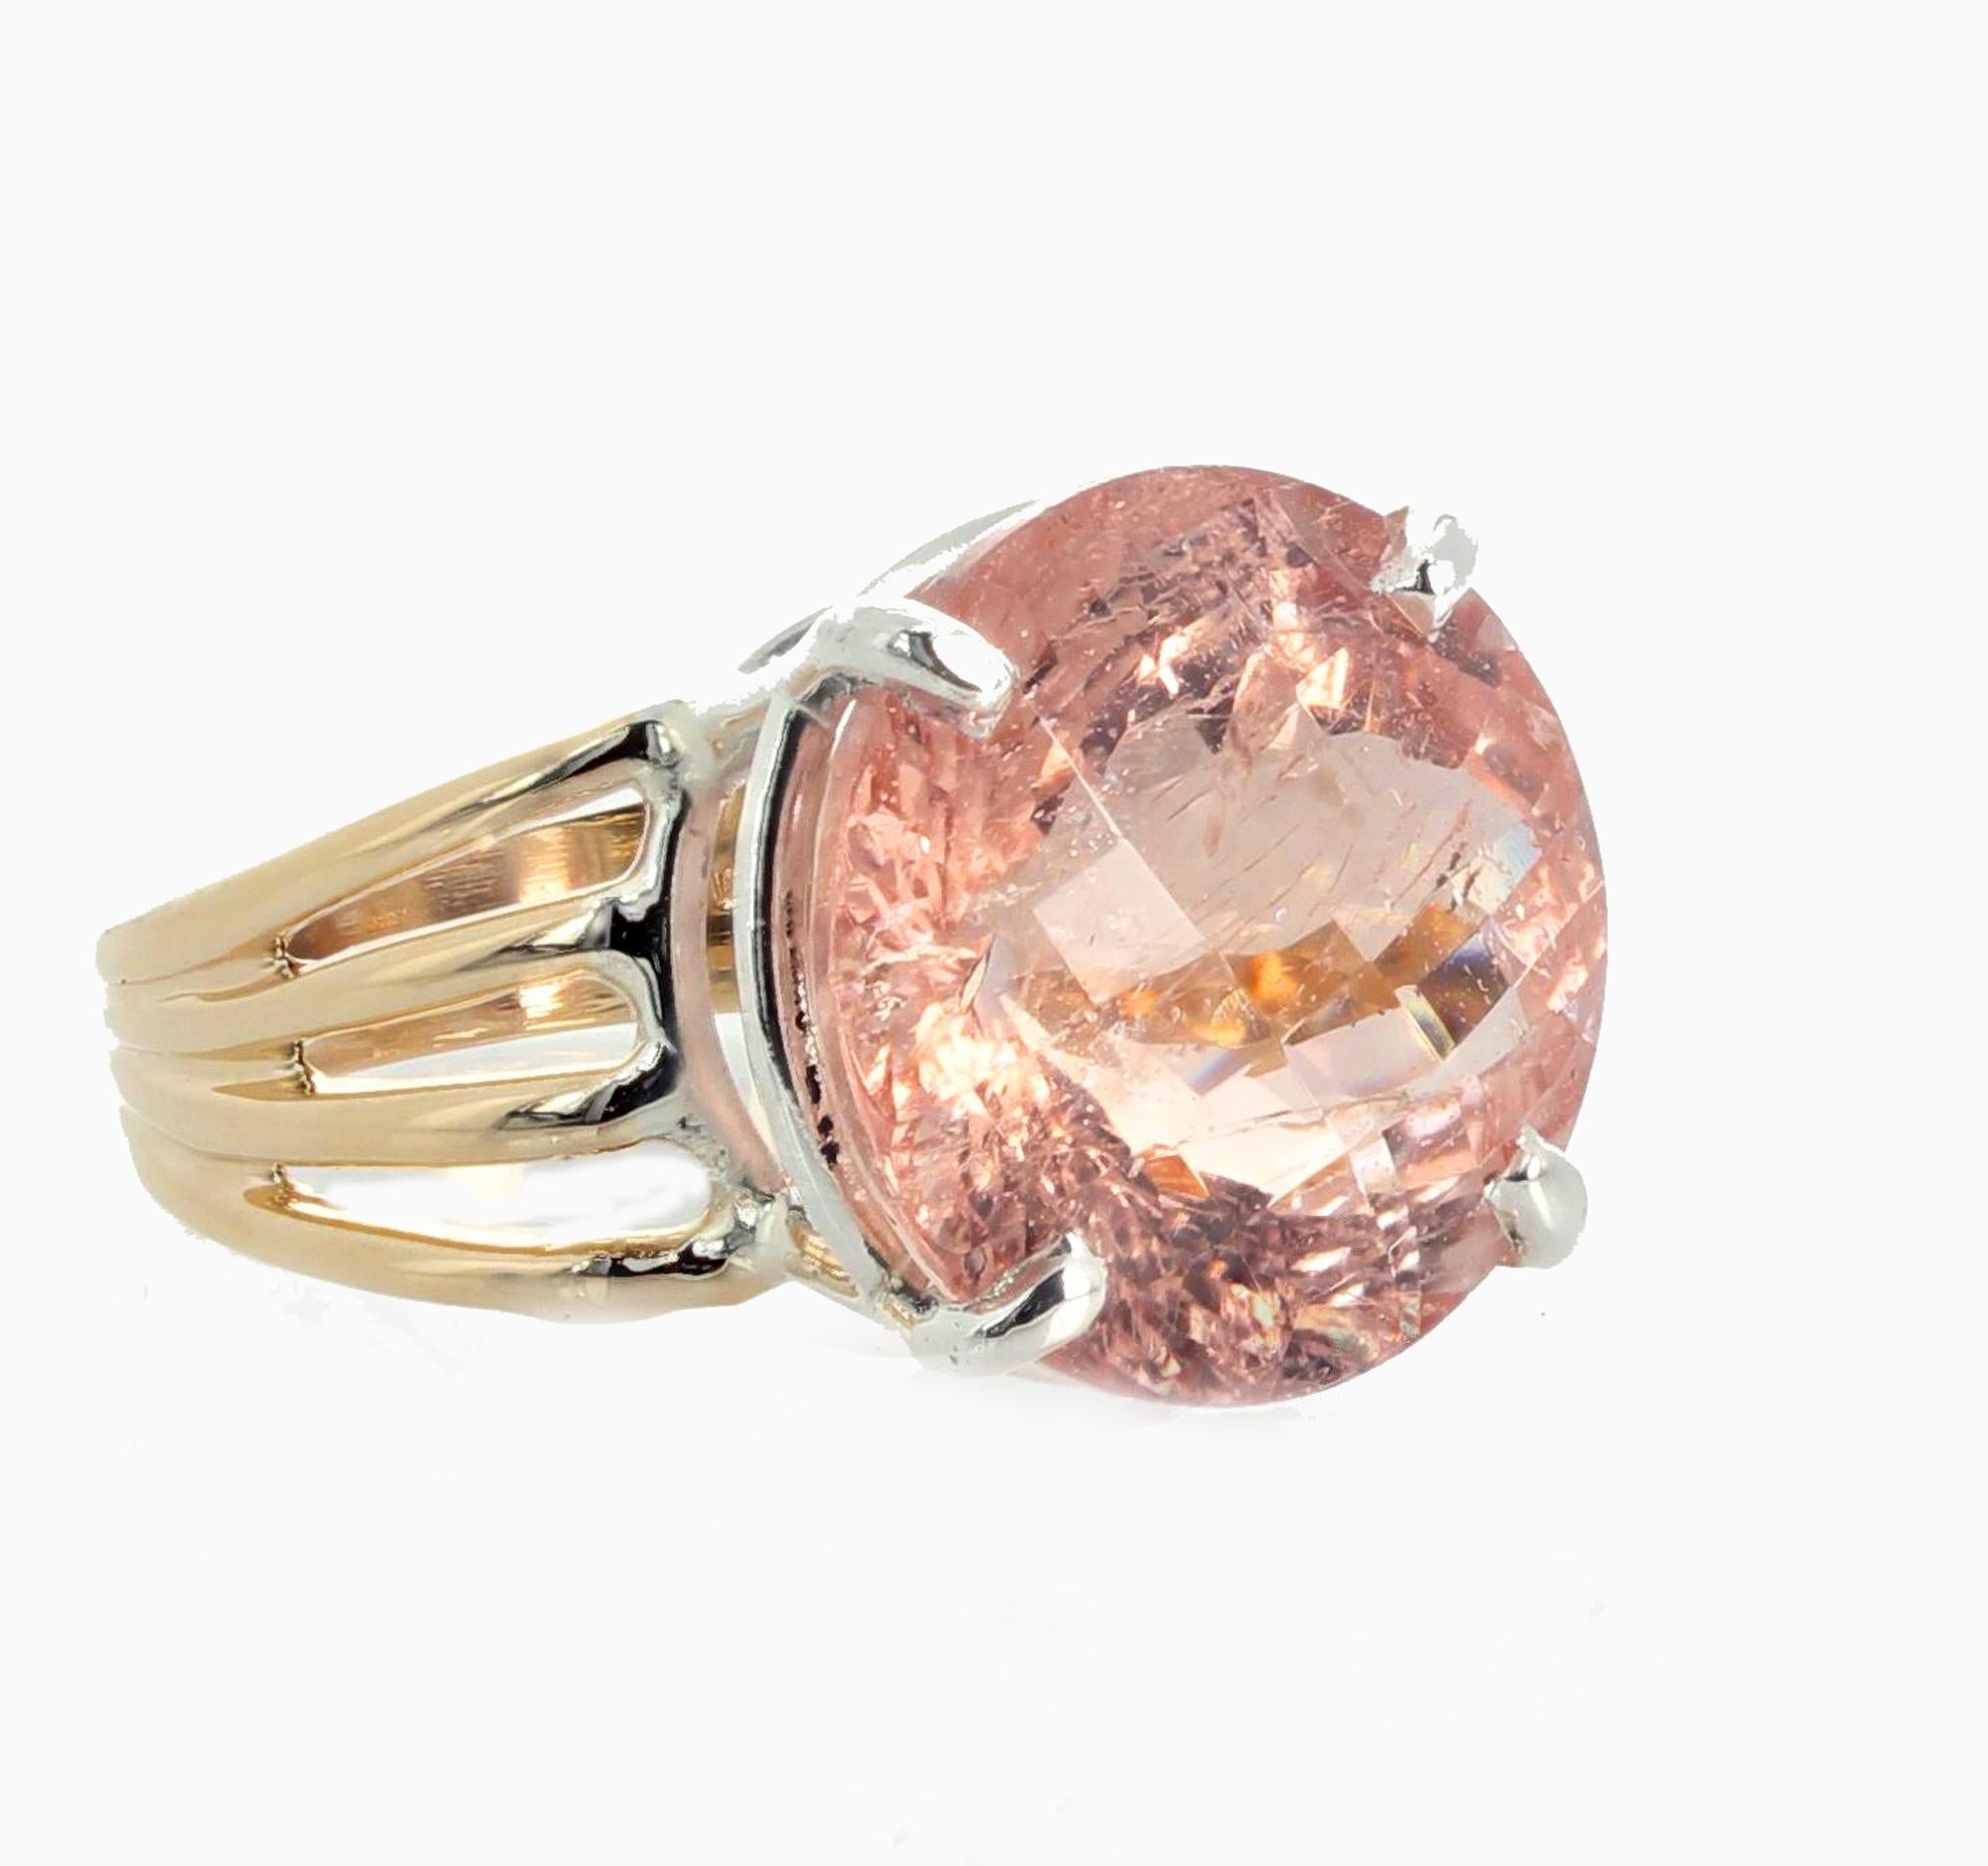 Round Cut AJD Glittering Natural 14.1Ct. Pink Morganite 14K Yellow Gold & Silver Ring